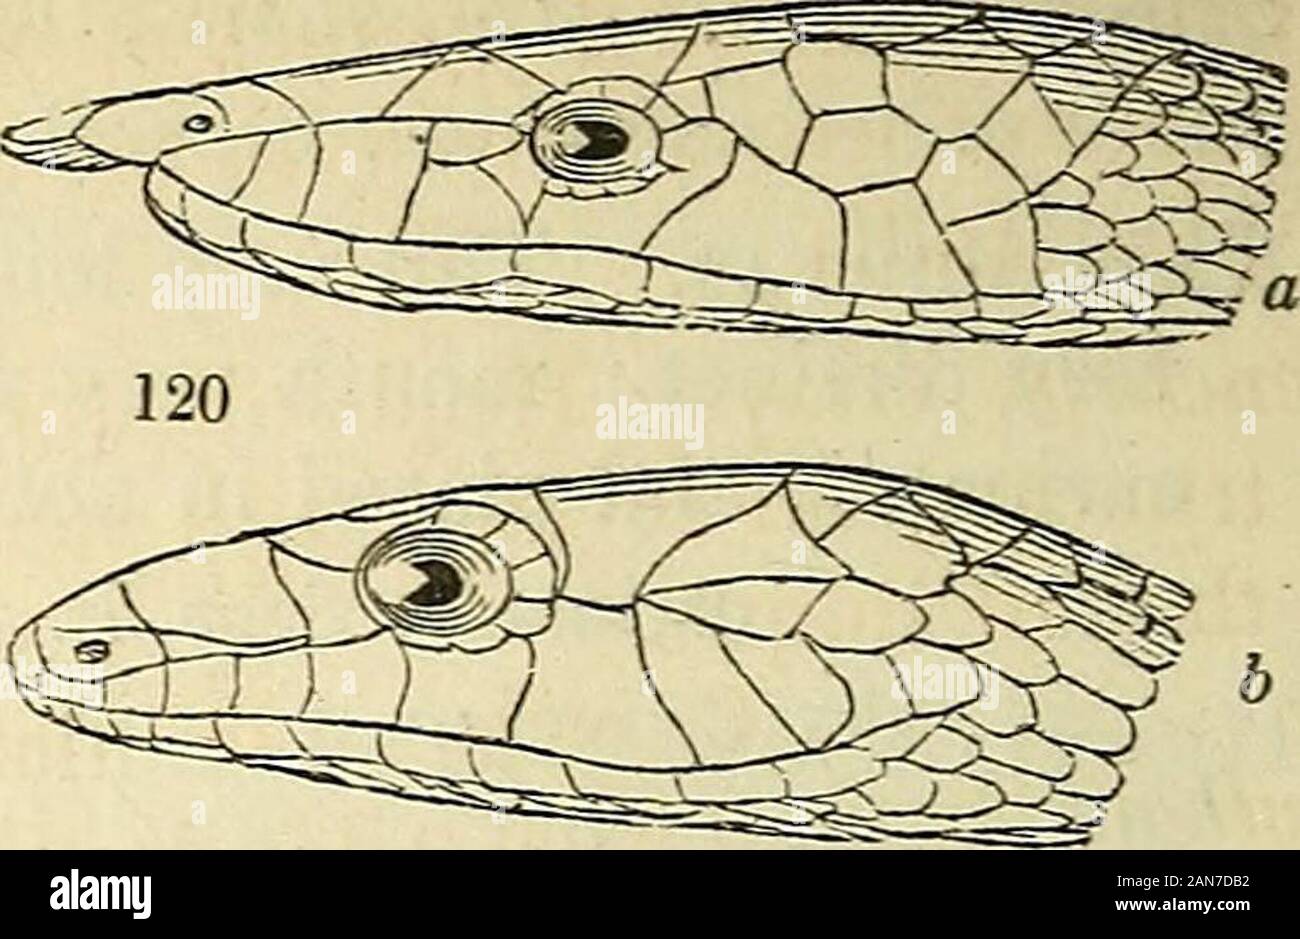 The natural history of fishes, amphibians, & reptiles, or monocardian animals . cylindrical, confounded withthe head ; tail very short; scales smooth; caudalplates entire, in two rows. C. Linnae Boie. (Coluber calamarius Linn.) Brachyorrhos Kuhl. Head not distinct; eyes small;tail short, acute. albus. Linn. Mus. Adol. pi. 14. fig. 2. Lycodon Boie. Scales nearly square ; body long, sub-compressed j abdominal plates convex.L. fasciolatus Linn. Shaw, Russell, Serp. i. pi. 21. Zenopeltis Boie. Nose rounded; plates of the headtriangular, larger than the dorsal scales; tail conical.Z. eoncolor Boie. Stock Photo